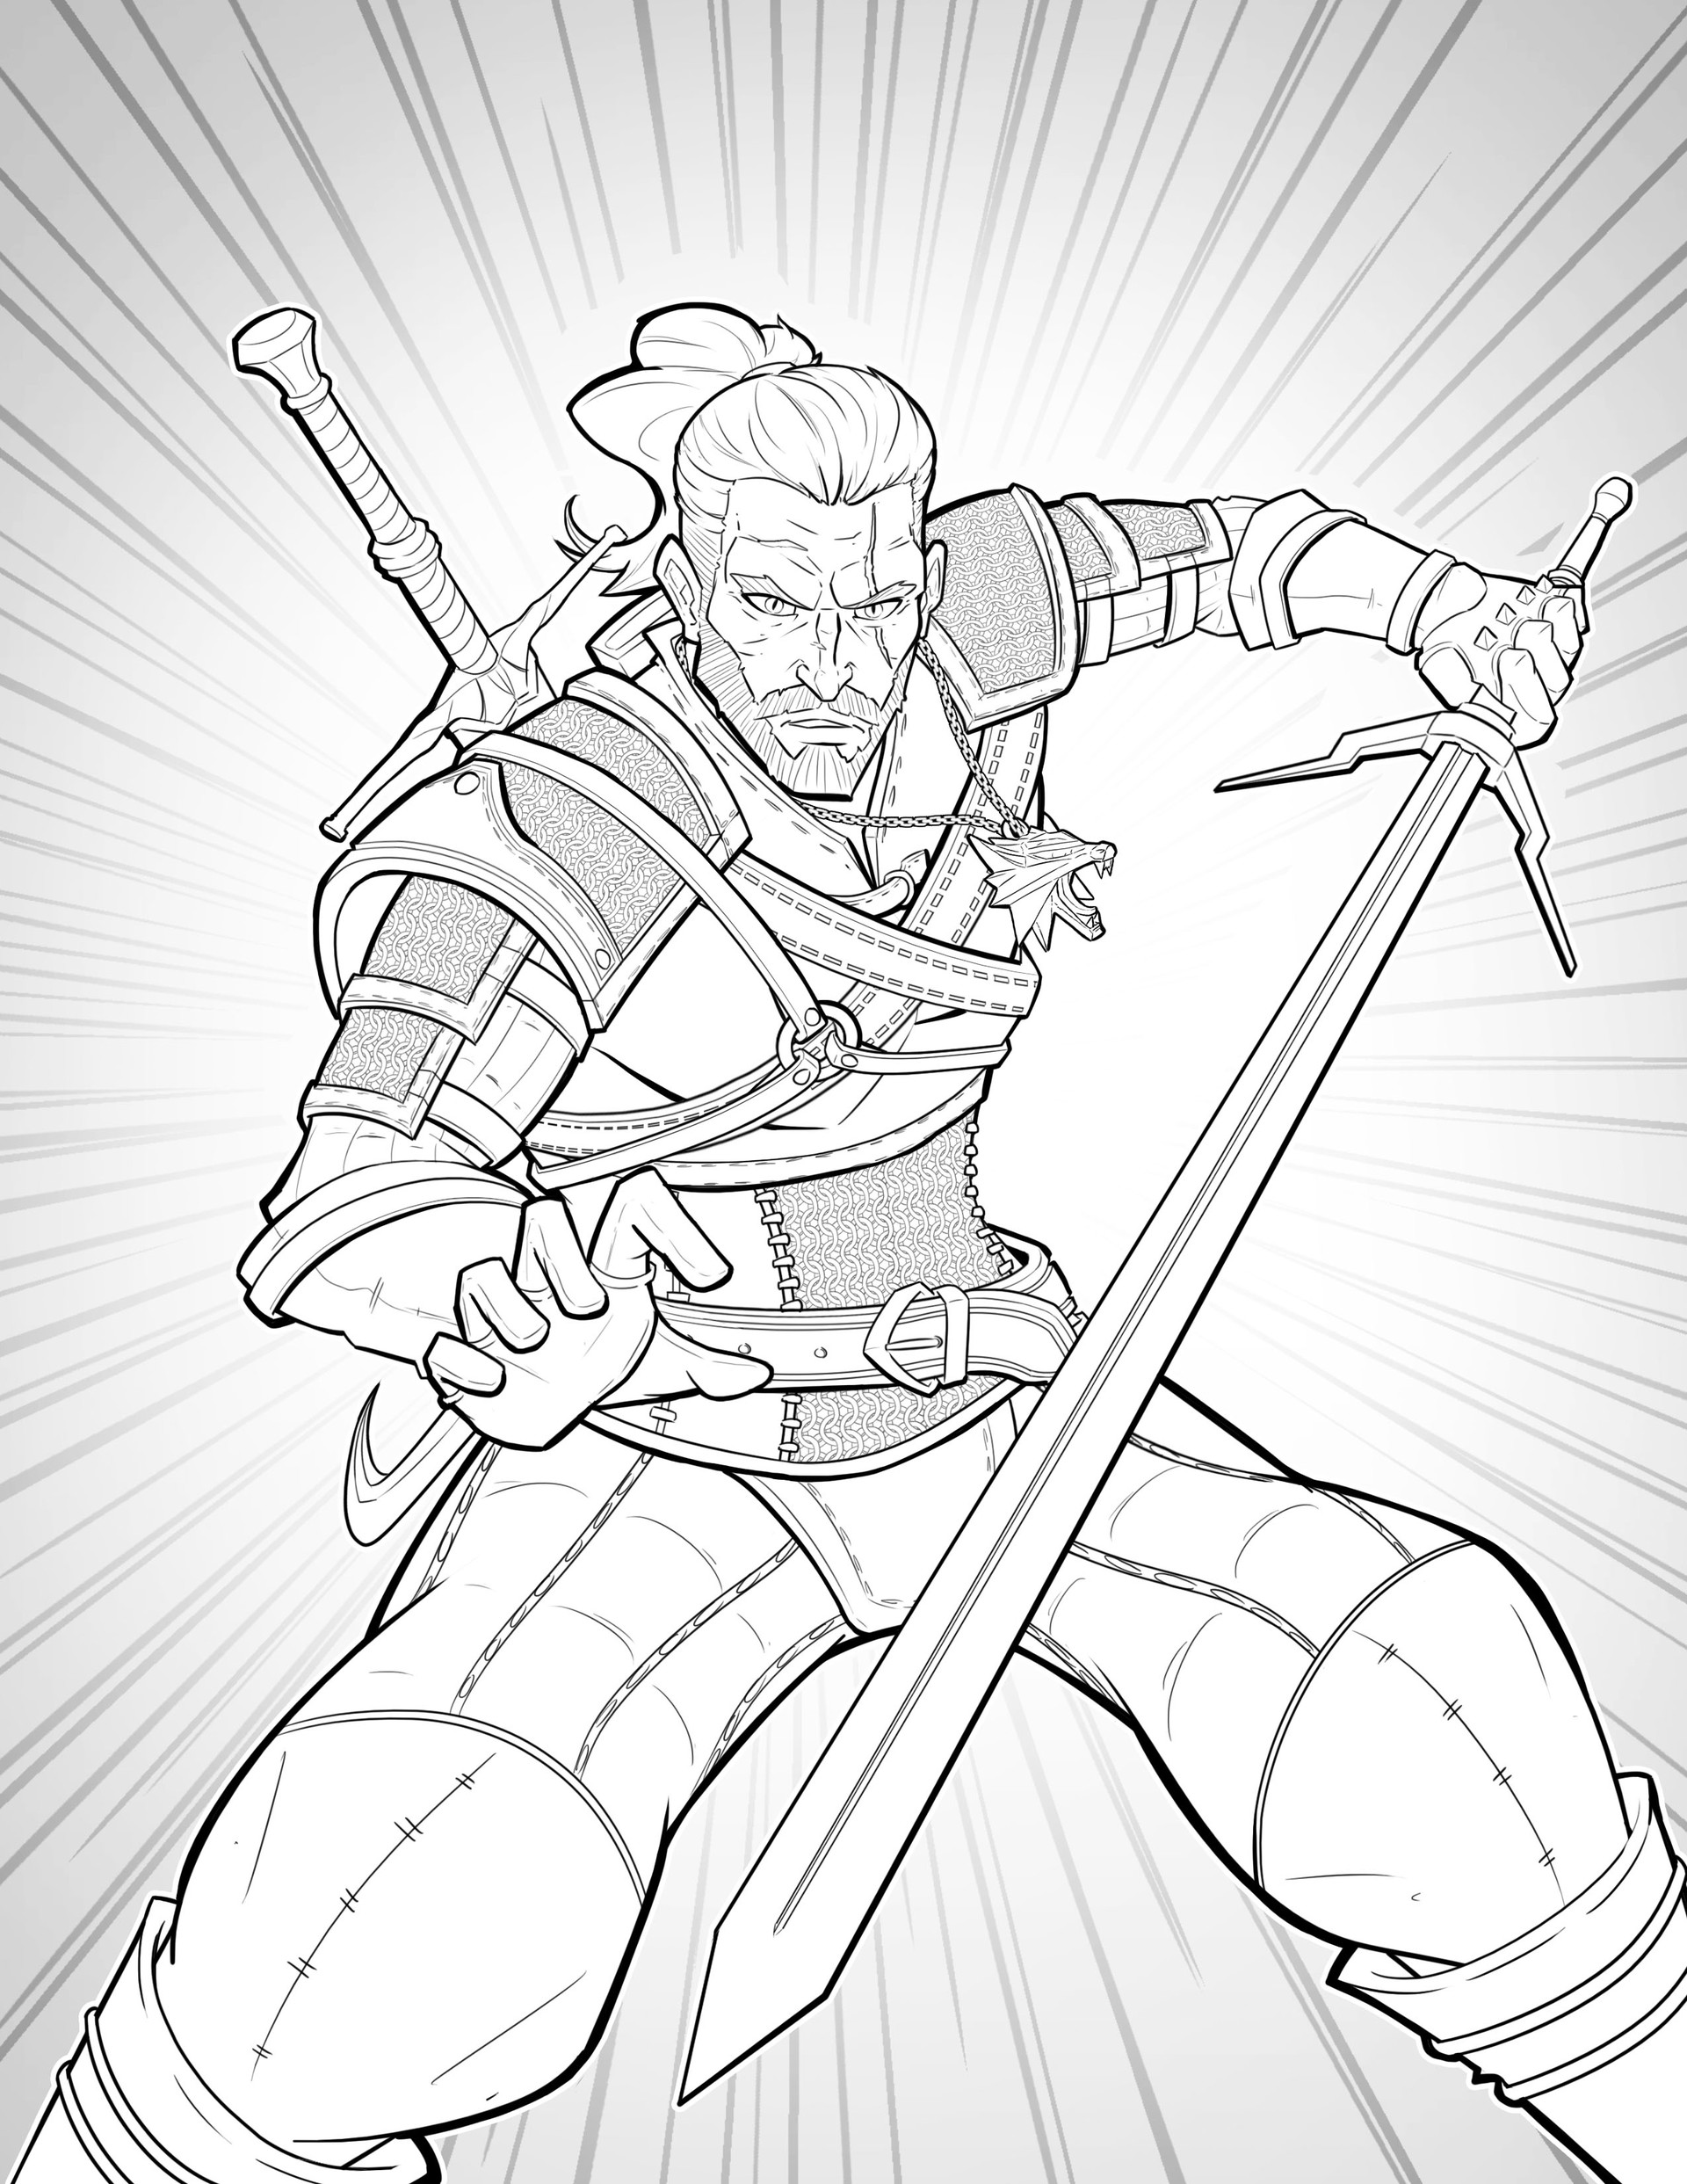 Download The Witcher coloring for free - Designlooter 2020 👨‍🎨